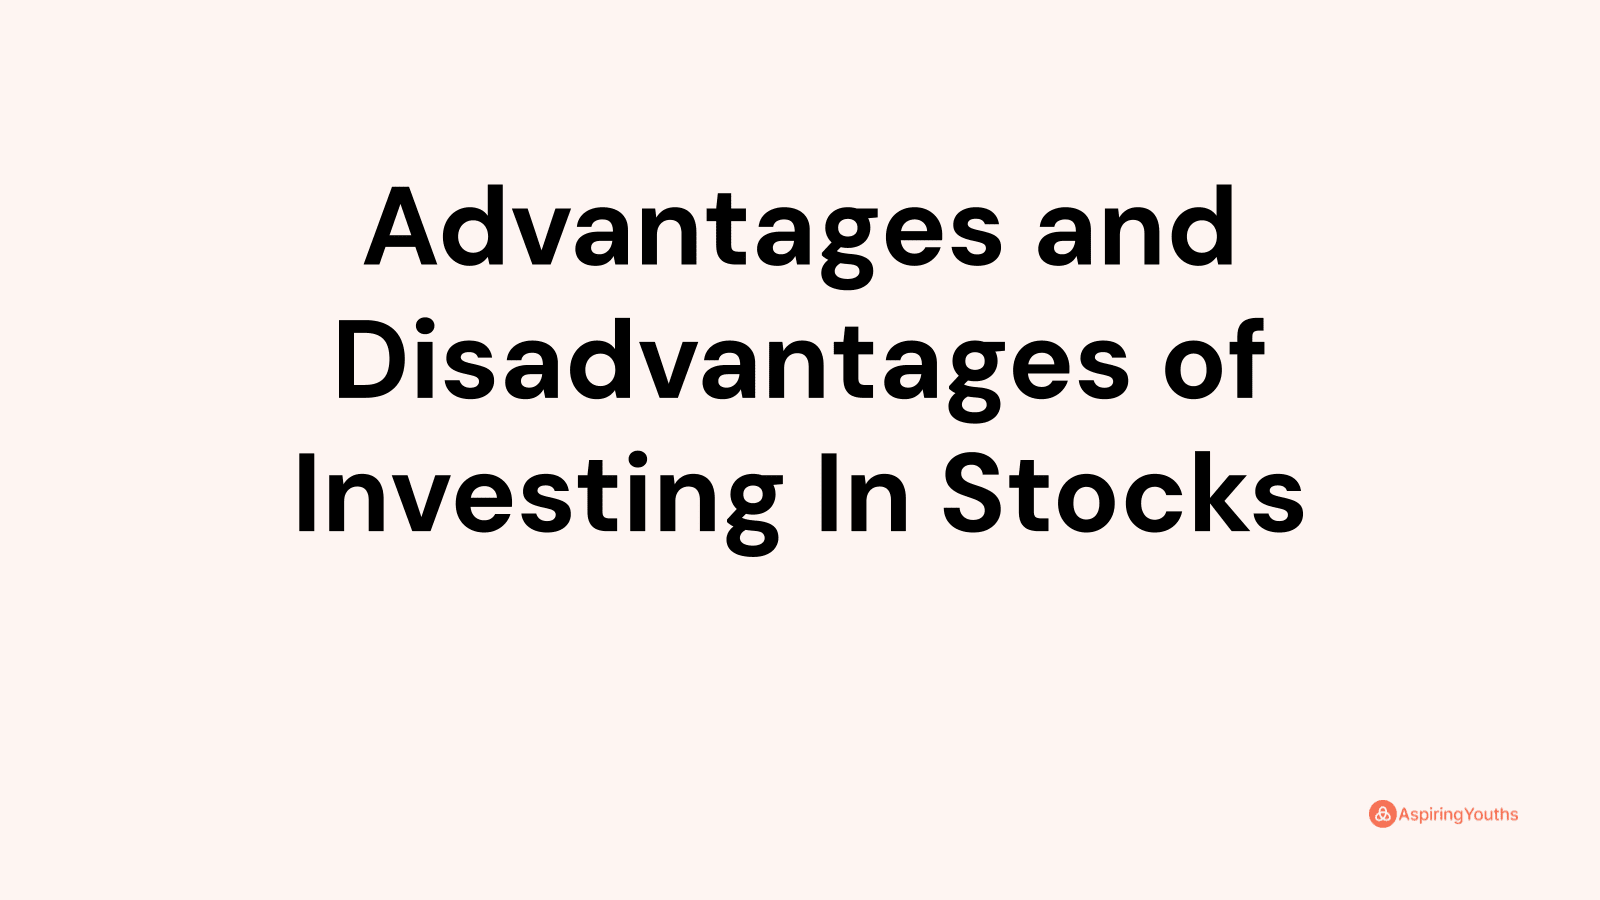 Advantages and disadvantages of Investing In Stocks